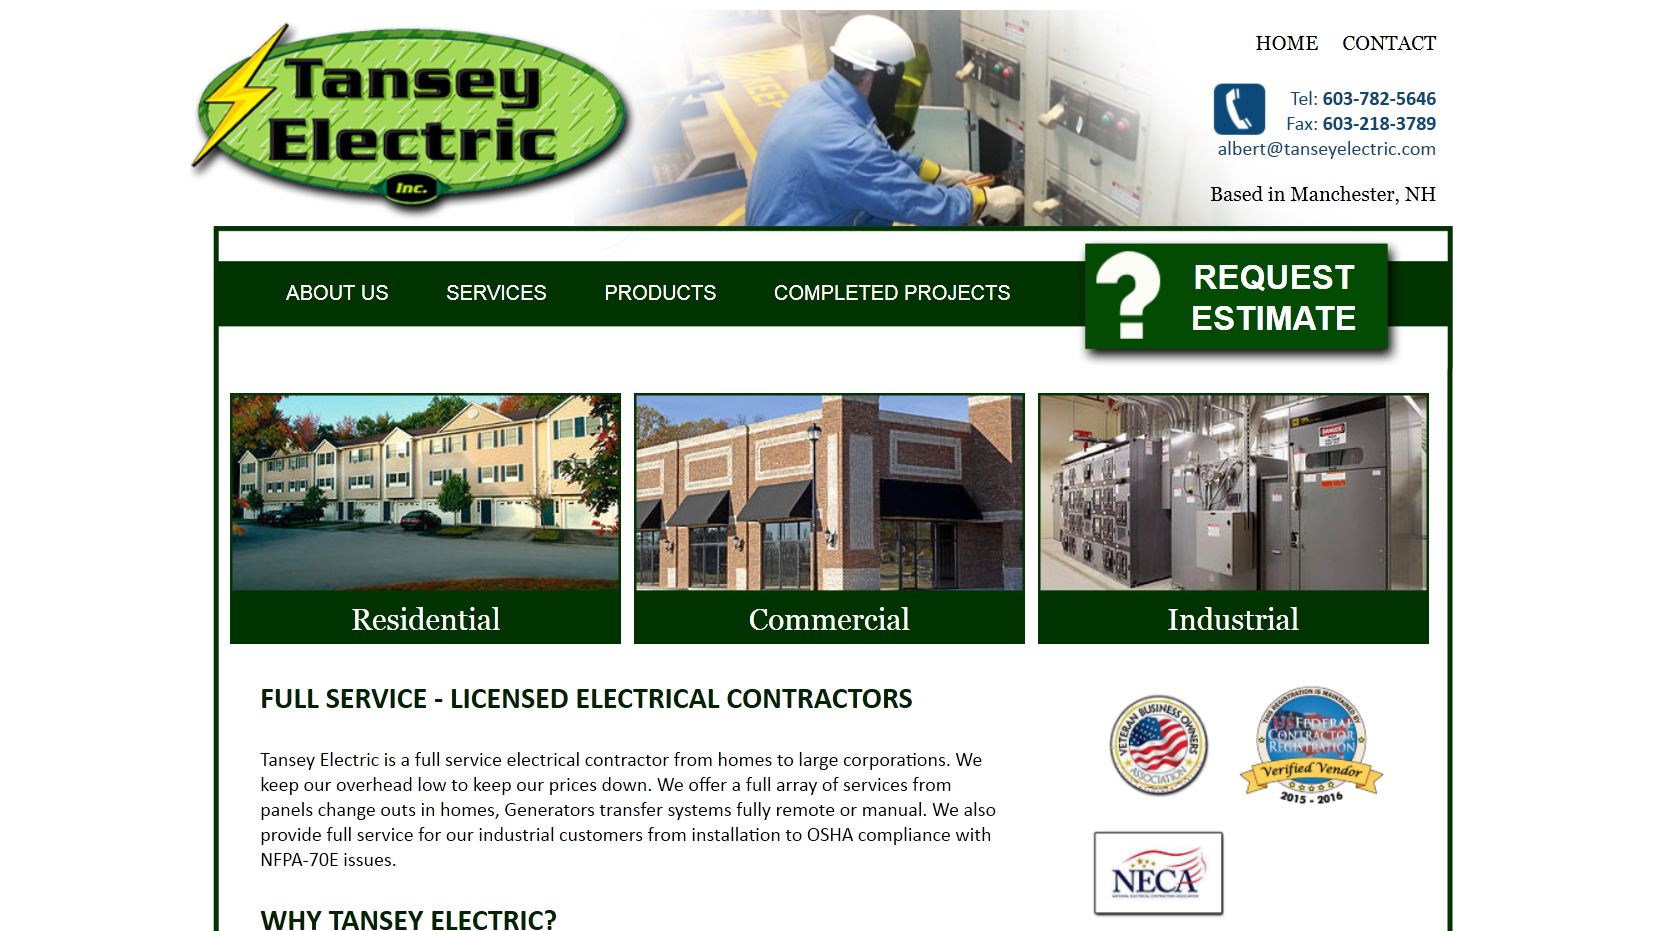 tanseyelectric.com